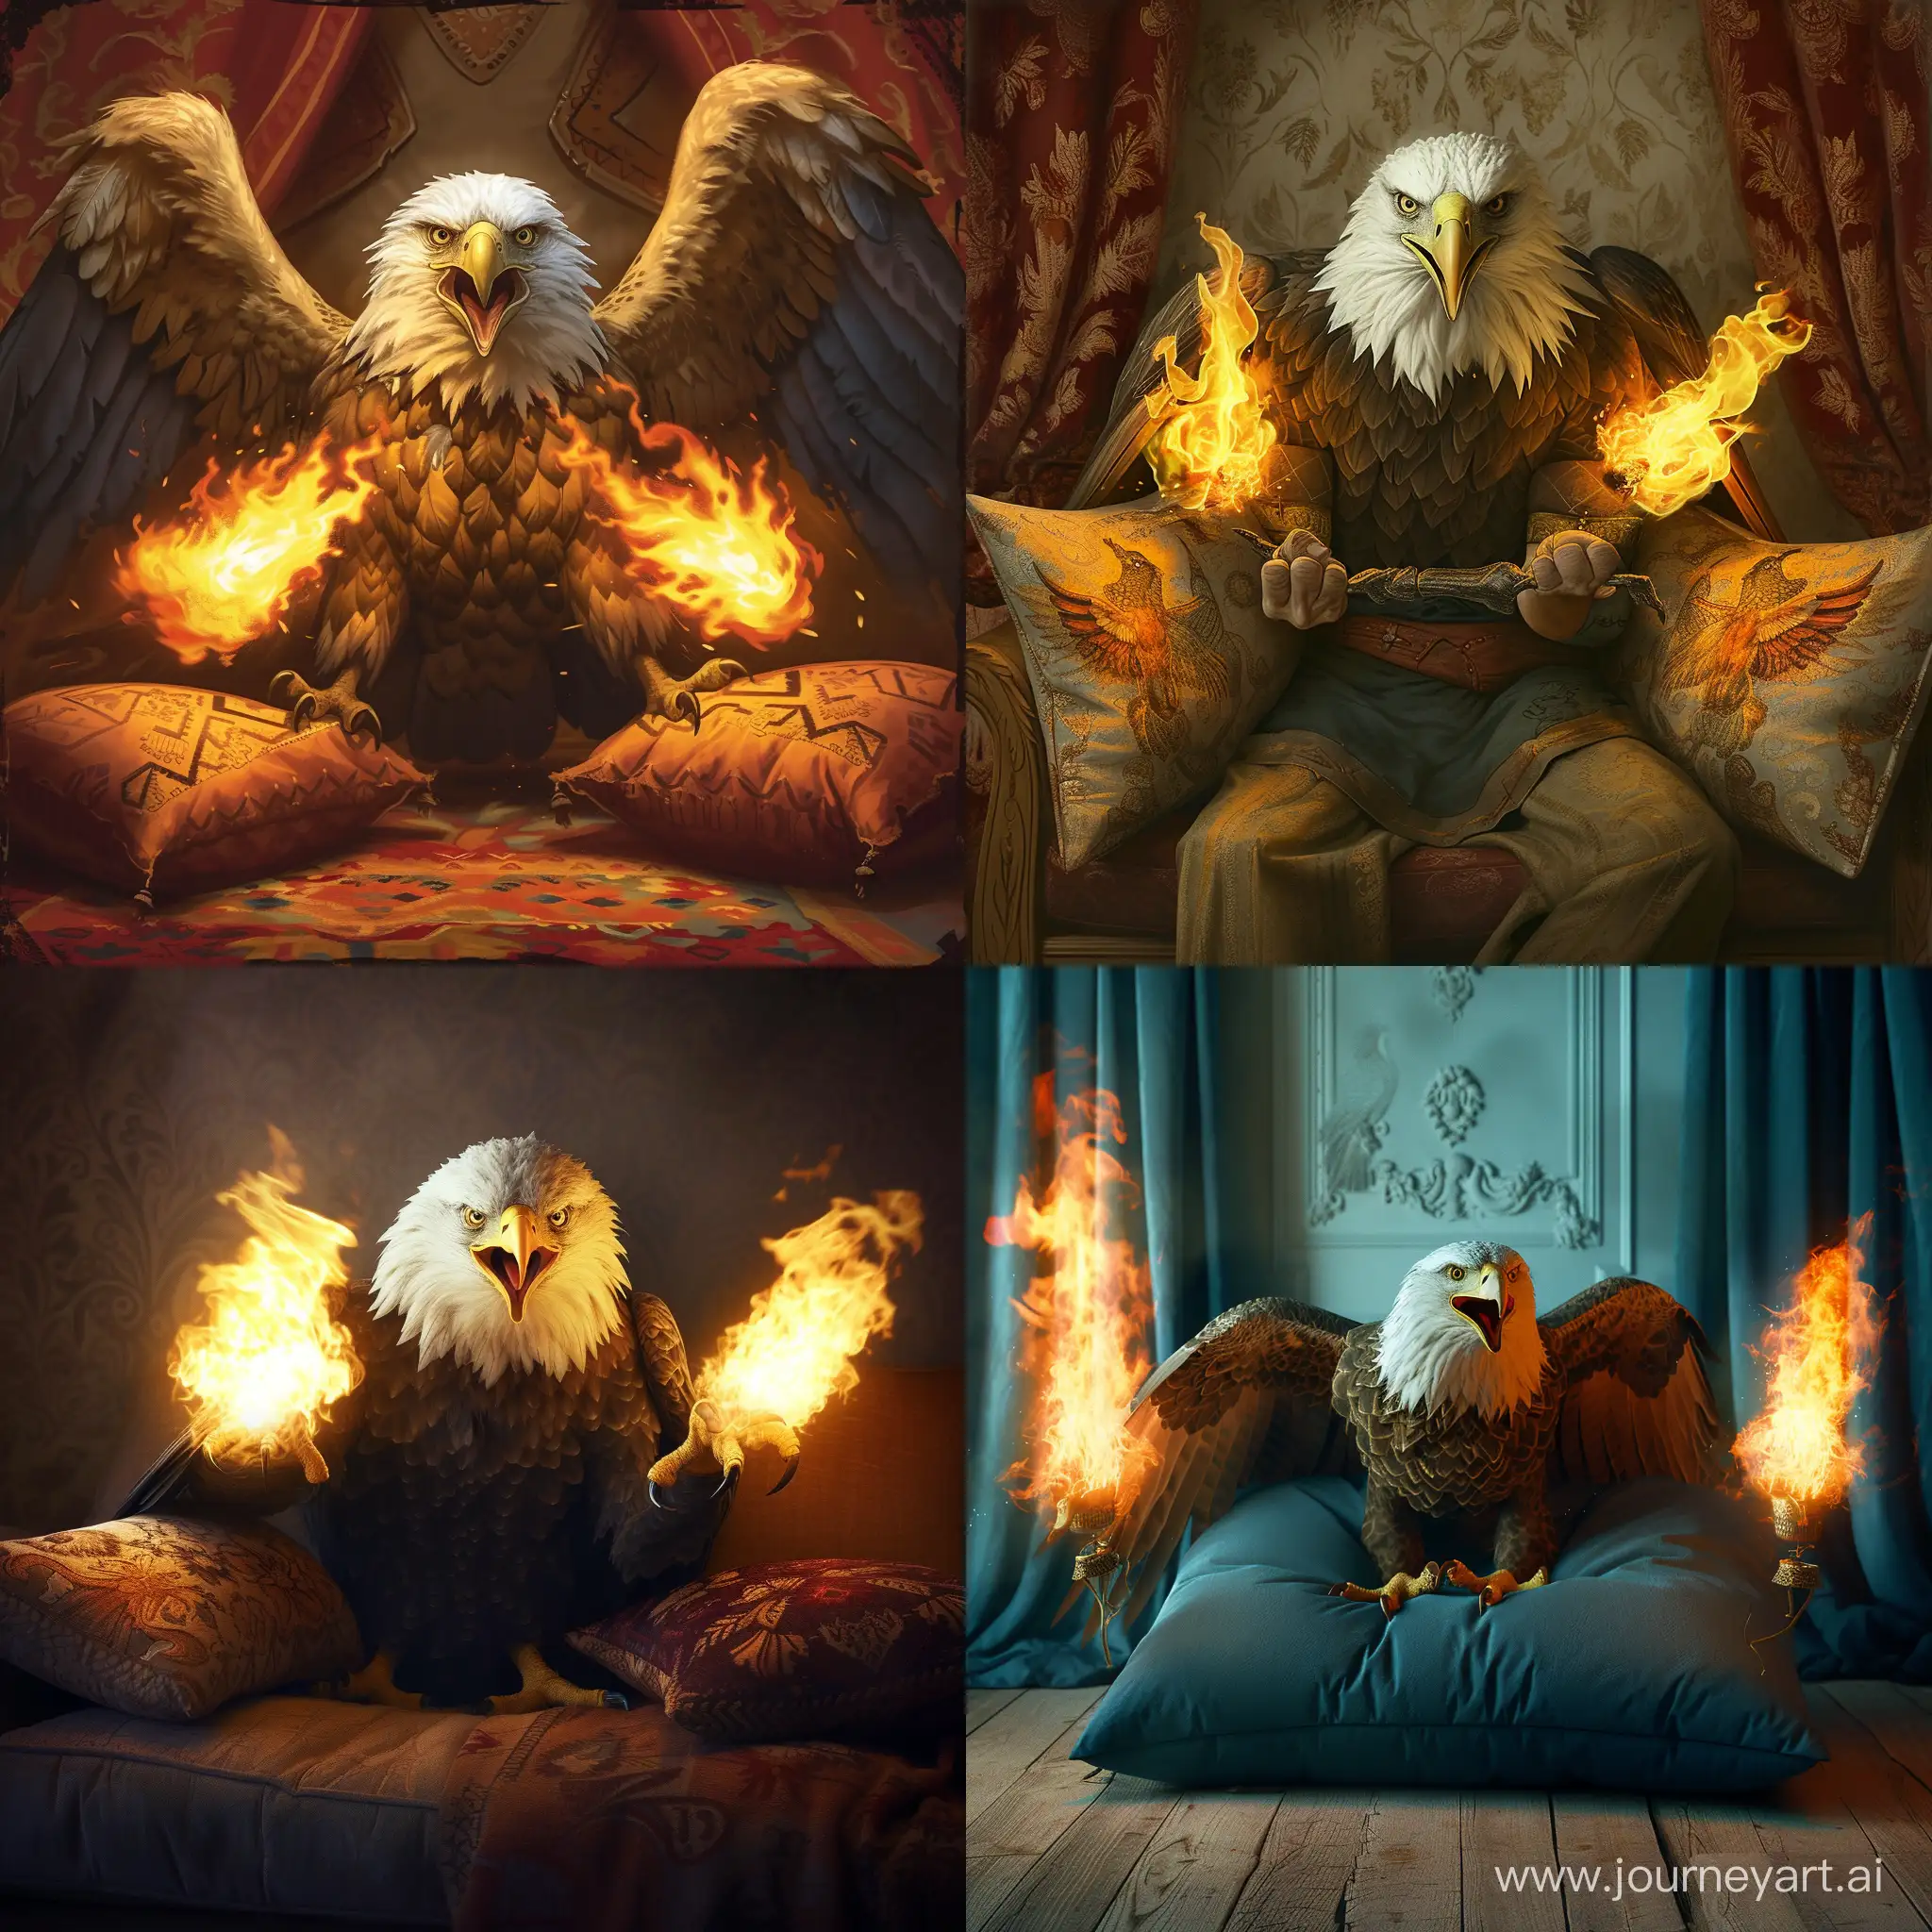 A humanoid eagle in the form of a genie who is very angry and shoots fire from two pillows